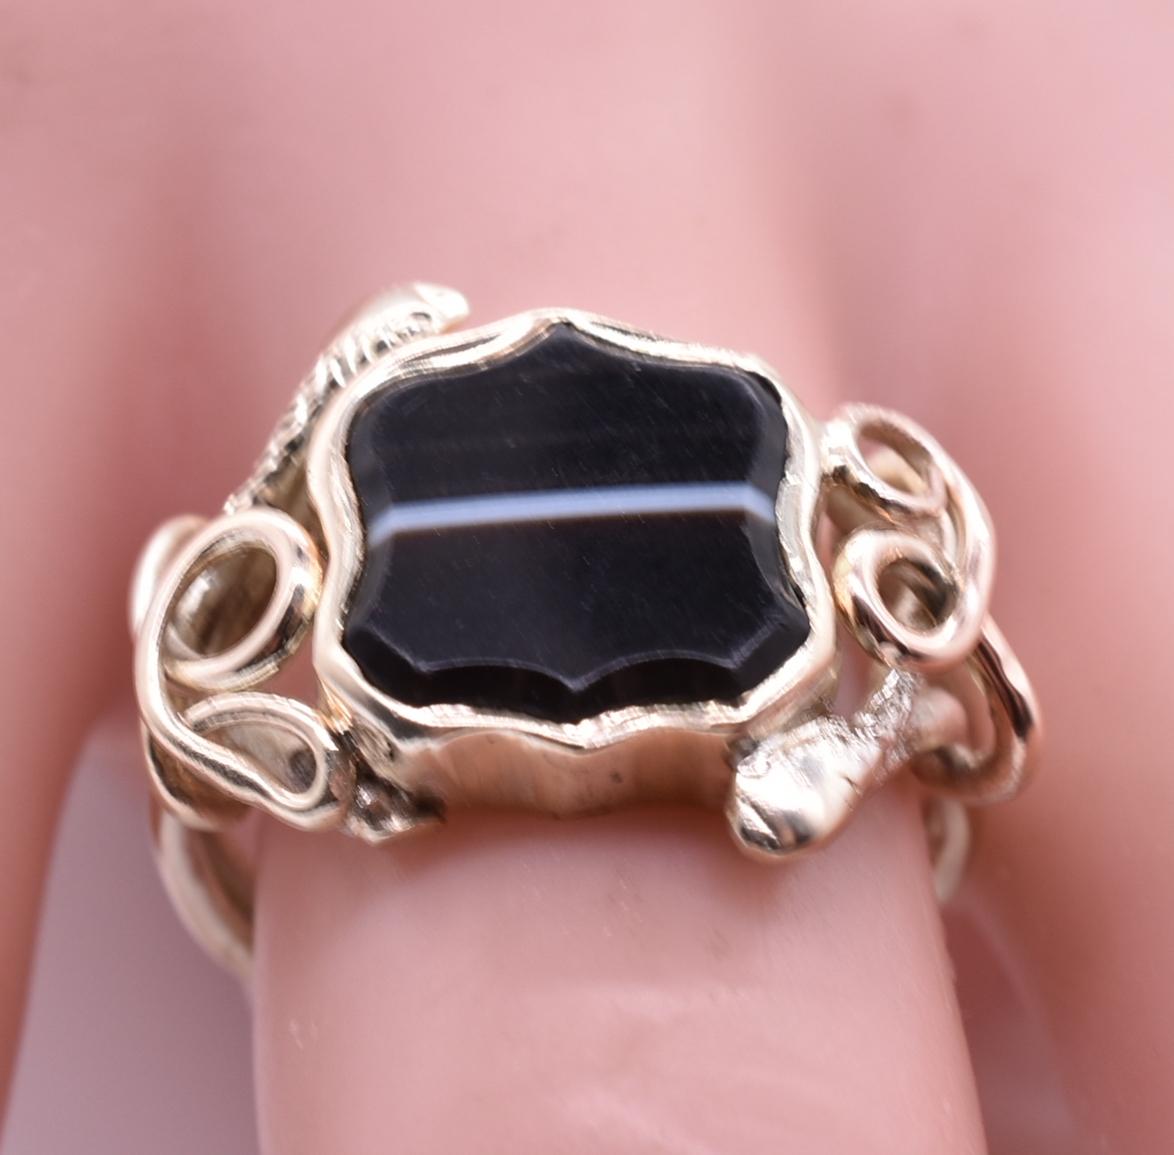 Wonderful unisex 15K snake signet ring with a Scottish banded agate stone at center. A snake surreptitiously weaves its way around each side of the charcoal colored banded agate at center. This ring is 15kbut has silvery tones. The ring works well